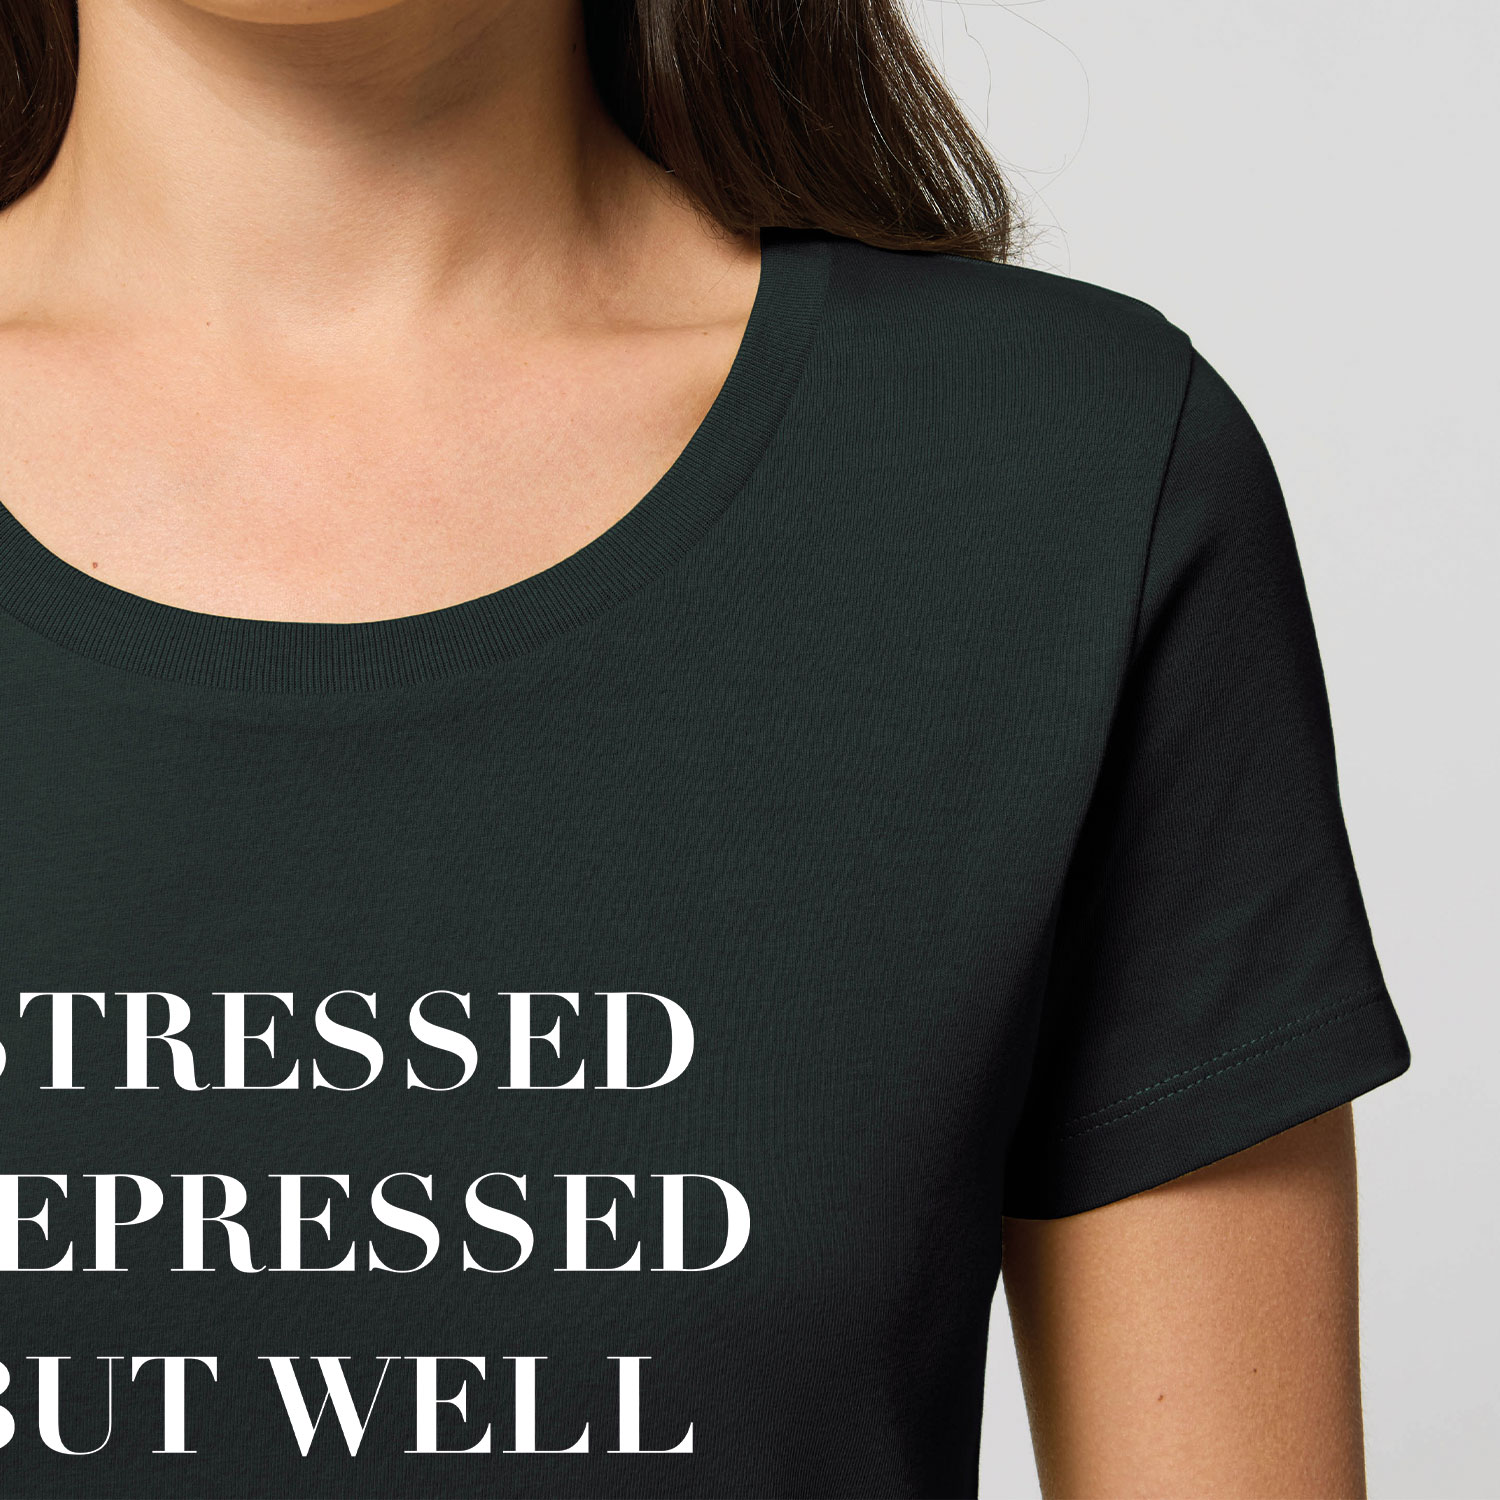 T-Shirt - Stressed depressed but well dressed